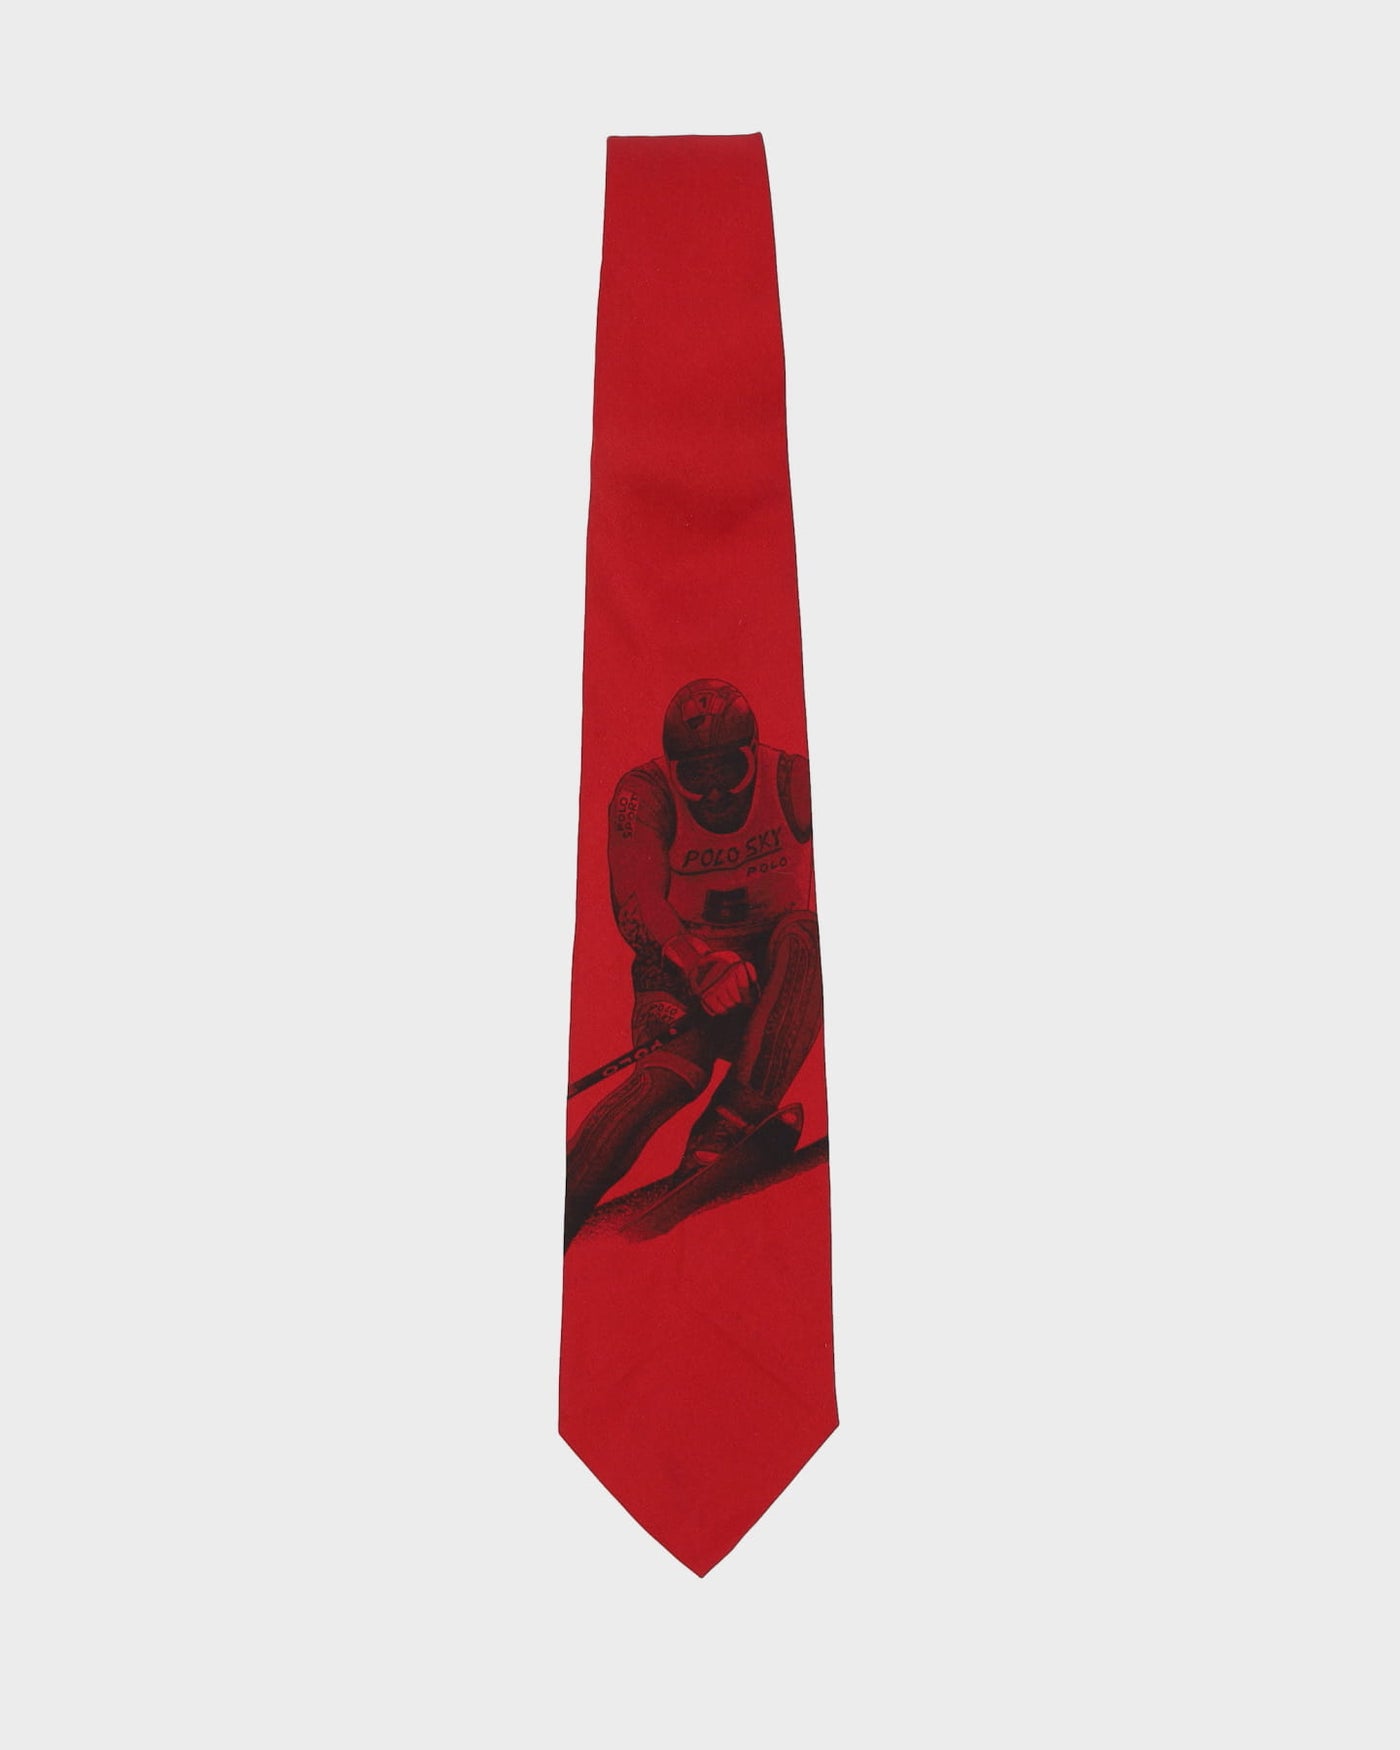 Vintage Polo Ralph Lauren Red Patterned Tie